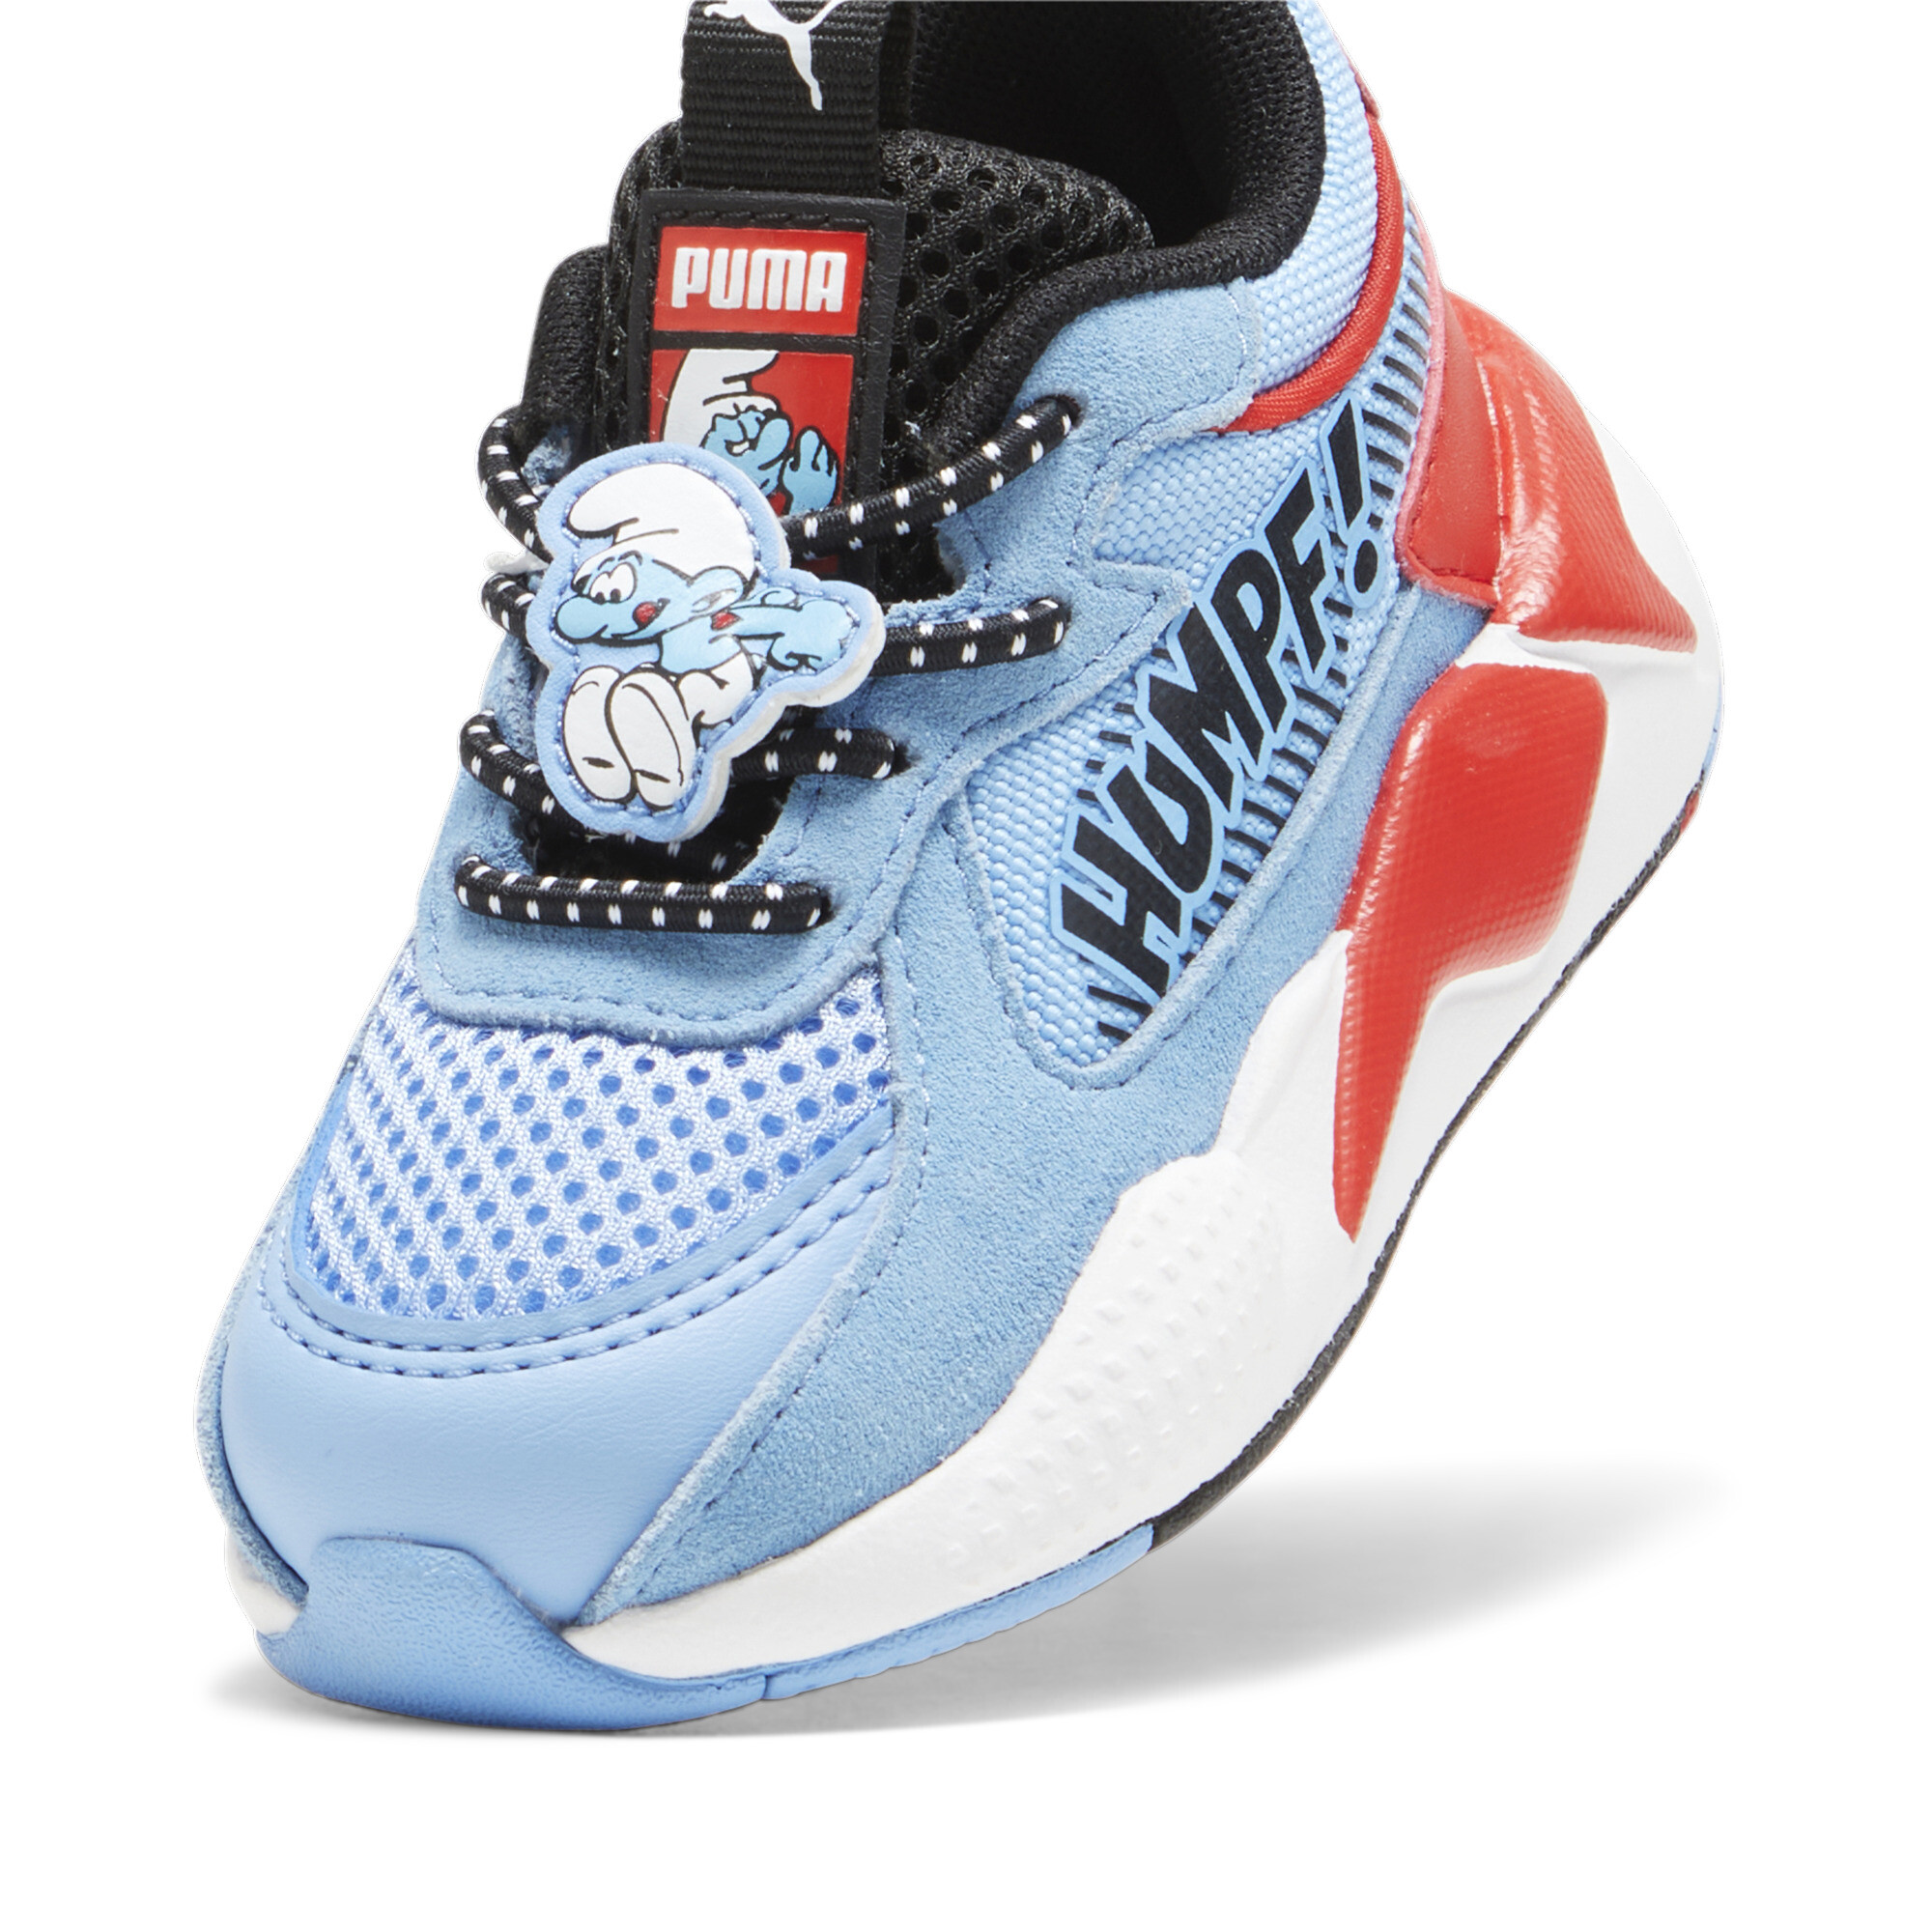 Kids' PUMA X THE SMURFS RS-X Toddlers' Sneakers In Blue, Size EU 26